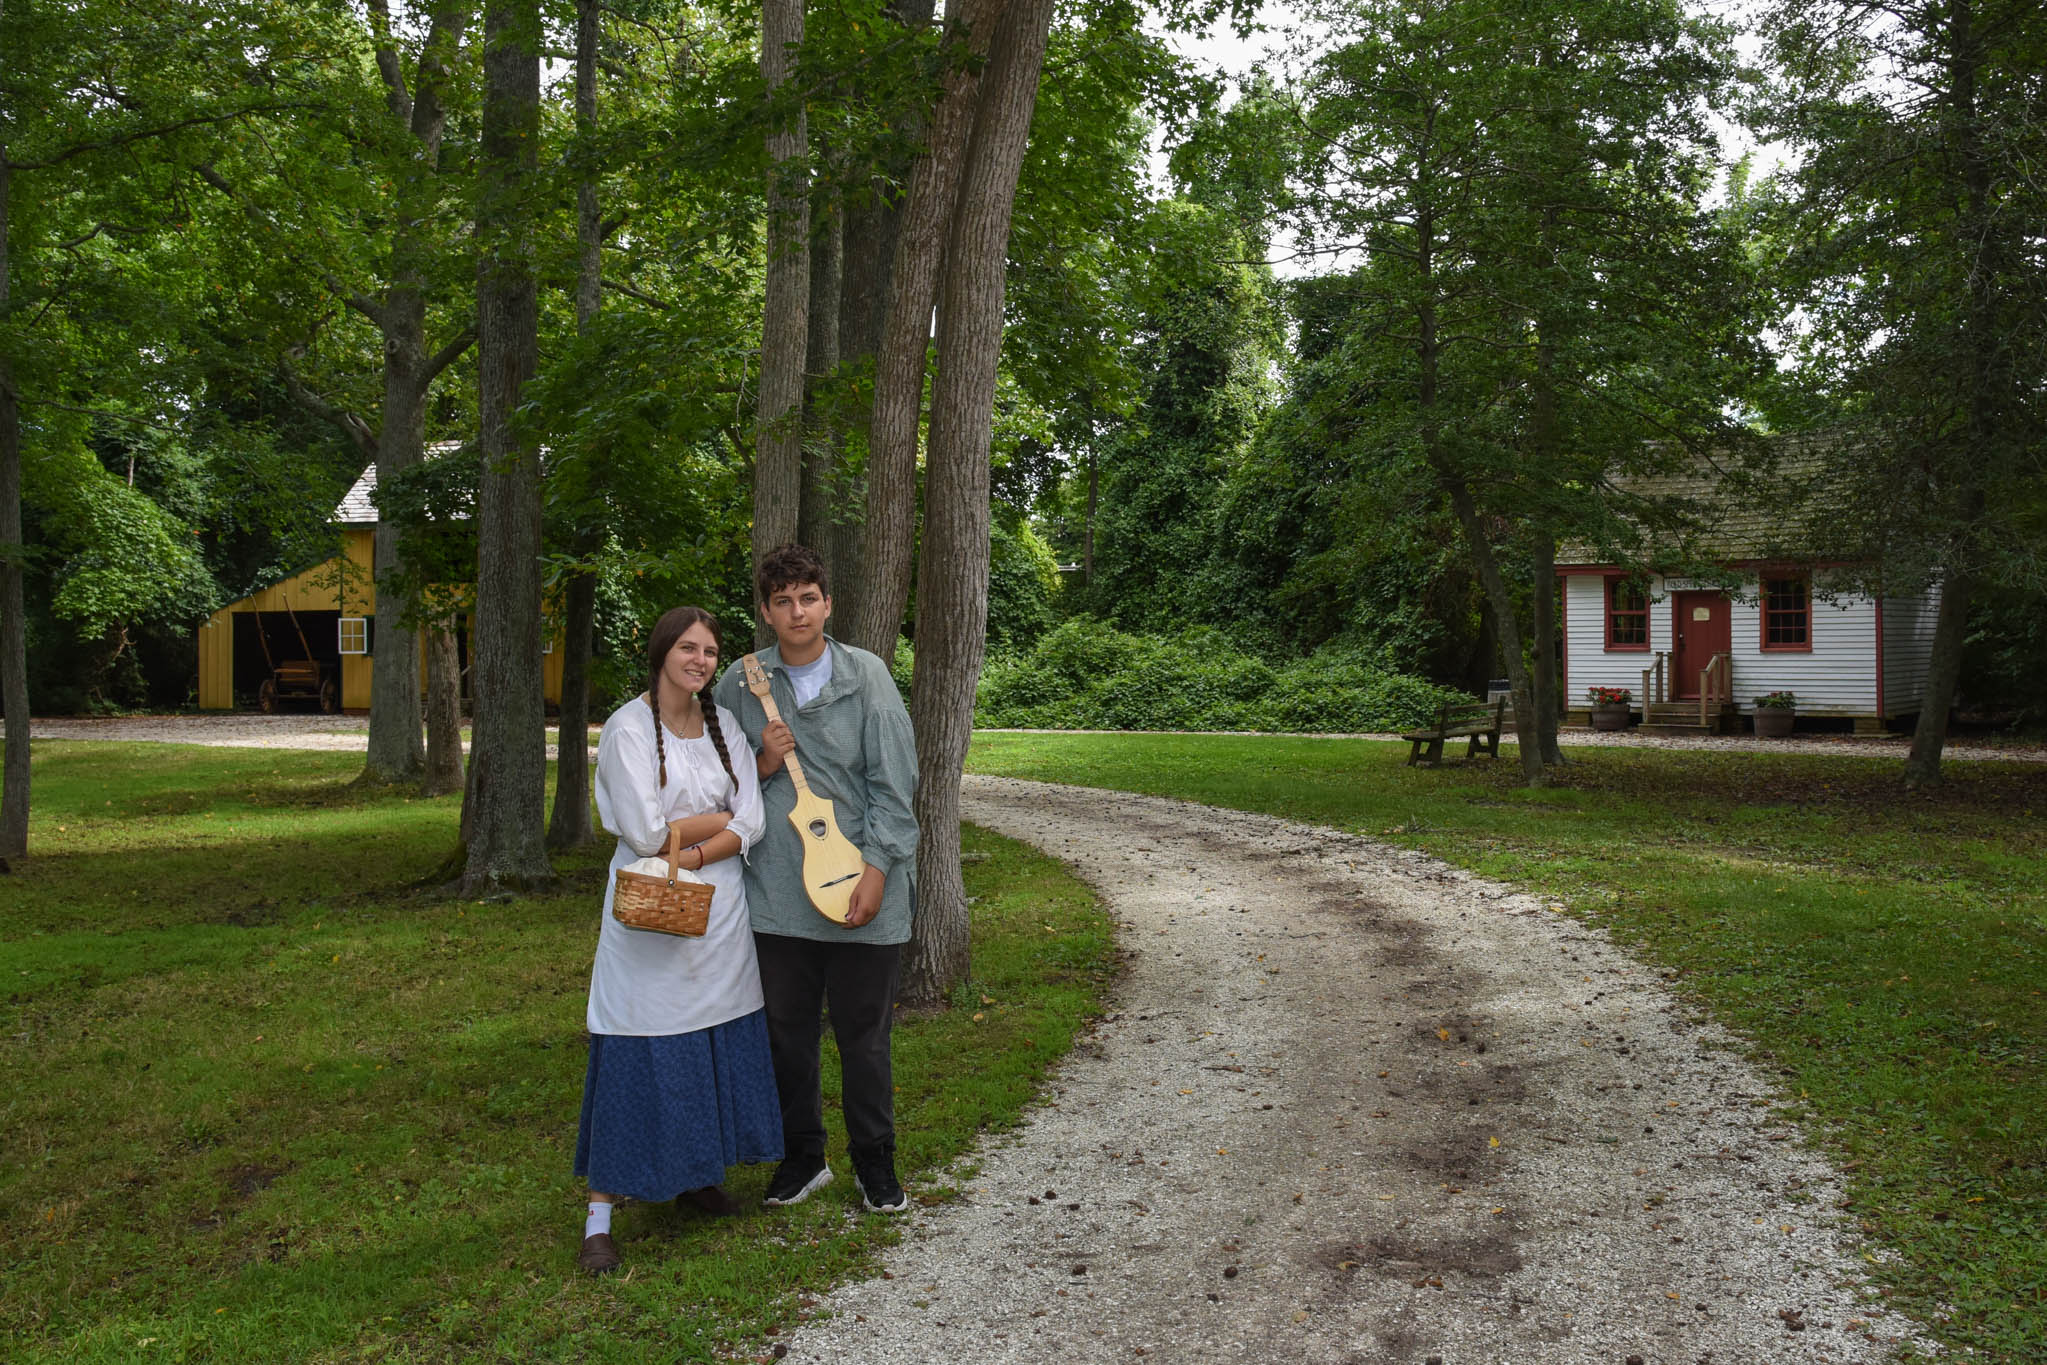 Two kids donating their time to explain this rich history at Historic Cold Spring Village.